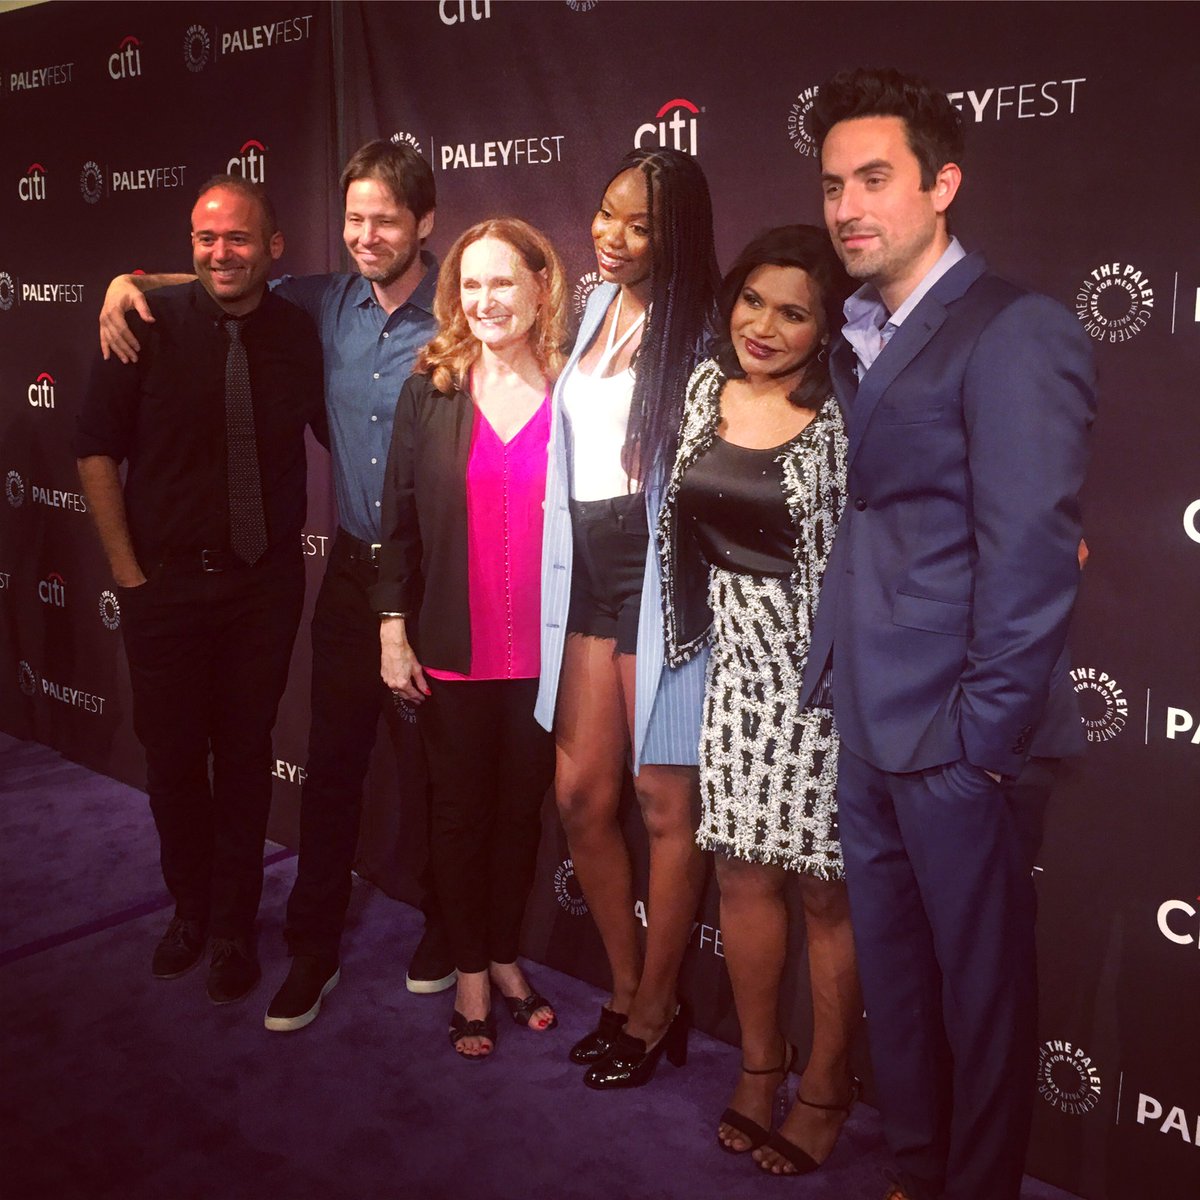 #TheMindyProject Paley Center panel! With our good friend and moderator @JarettSays https://t.co/9yikubSpbA